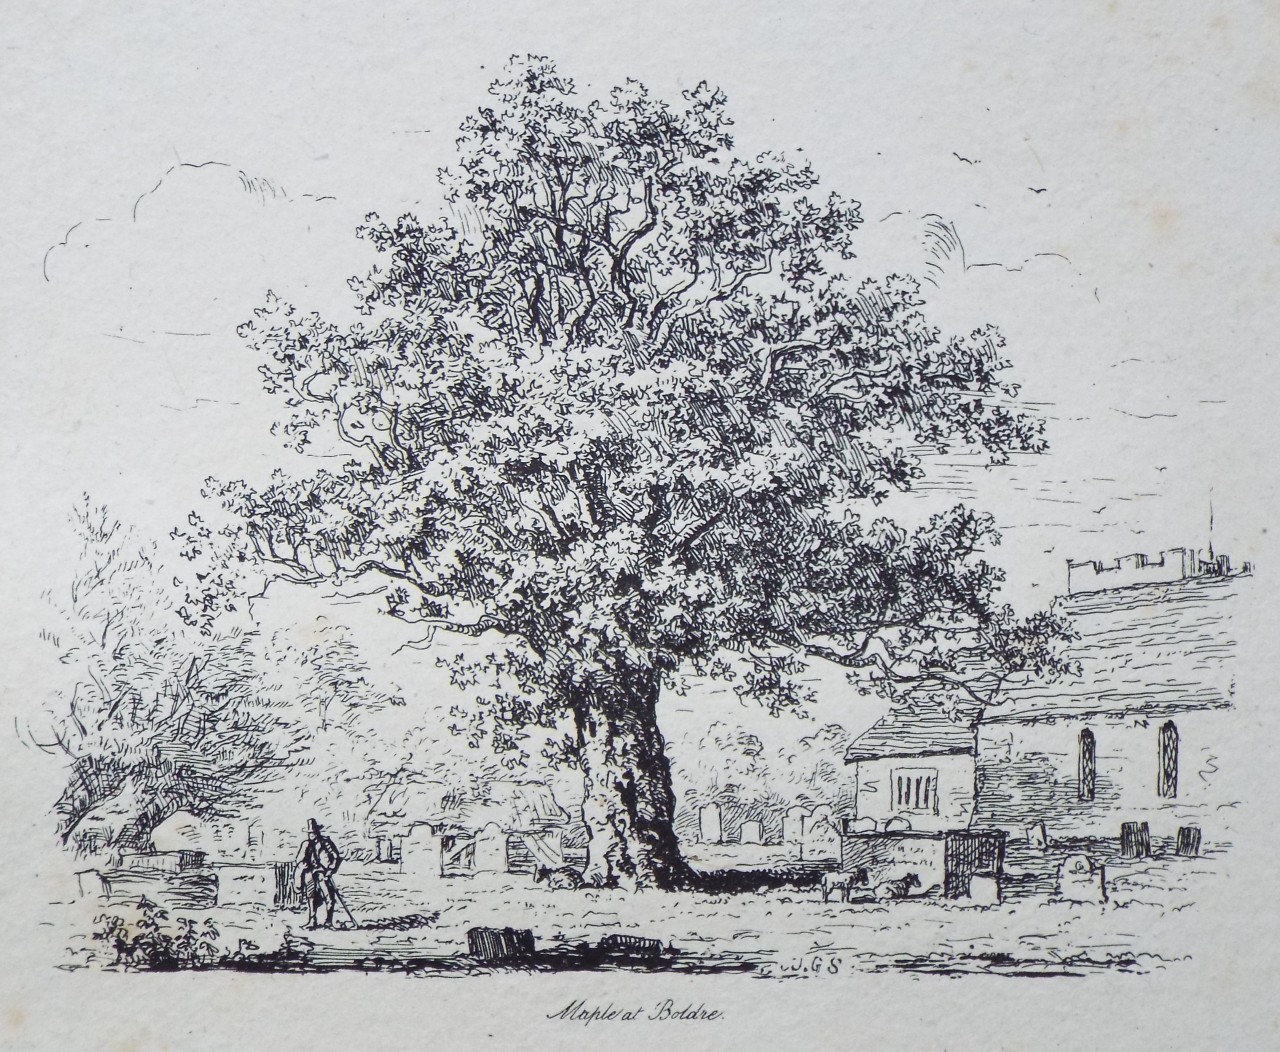 Etching - Maple at Boldre. - Strutt